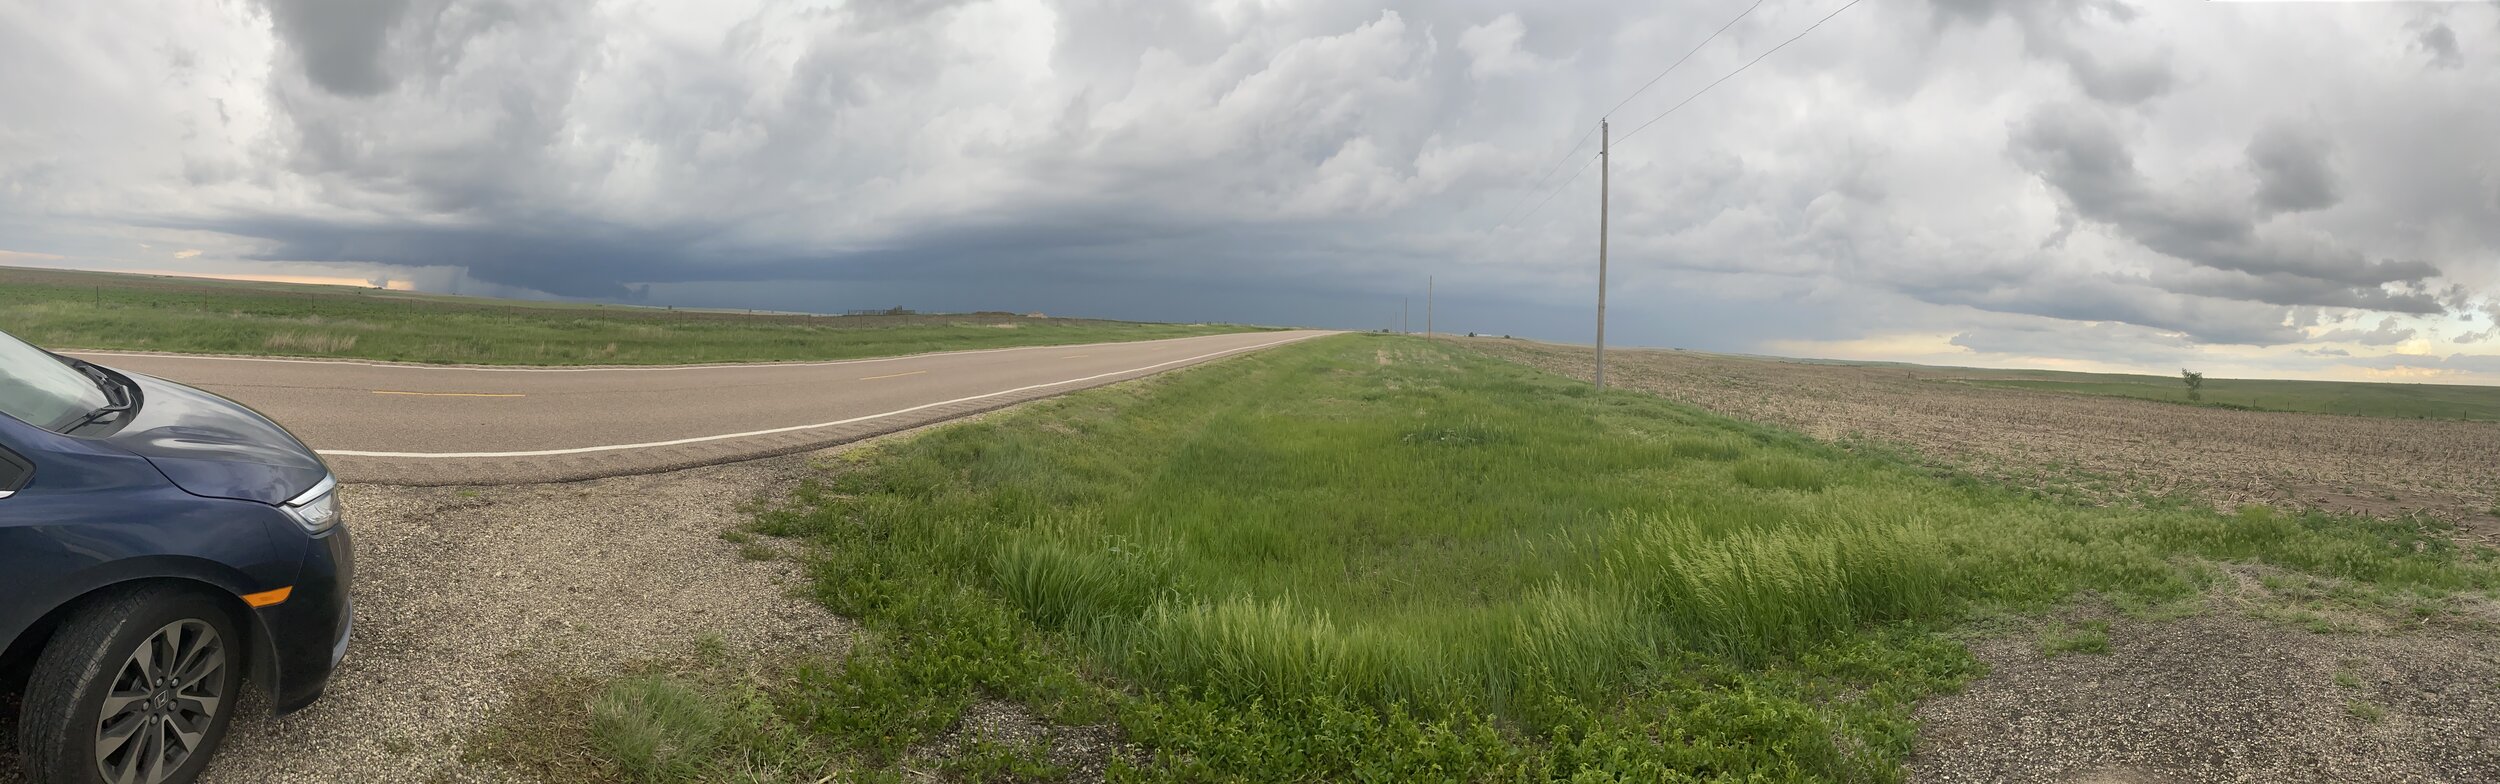 A panoramic view to show how light it was all around this thing!  Selden, KS  5/24/21